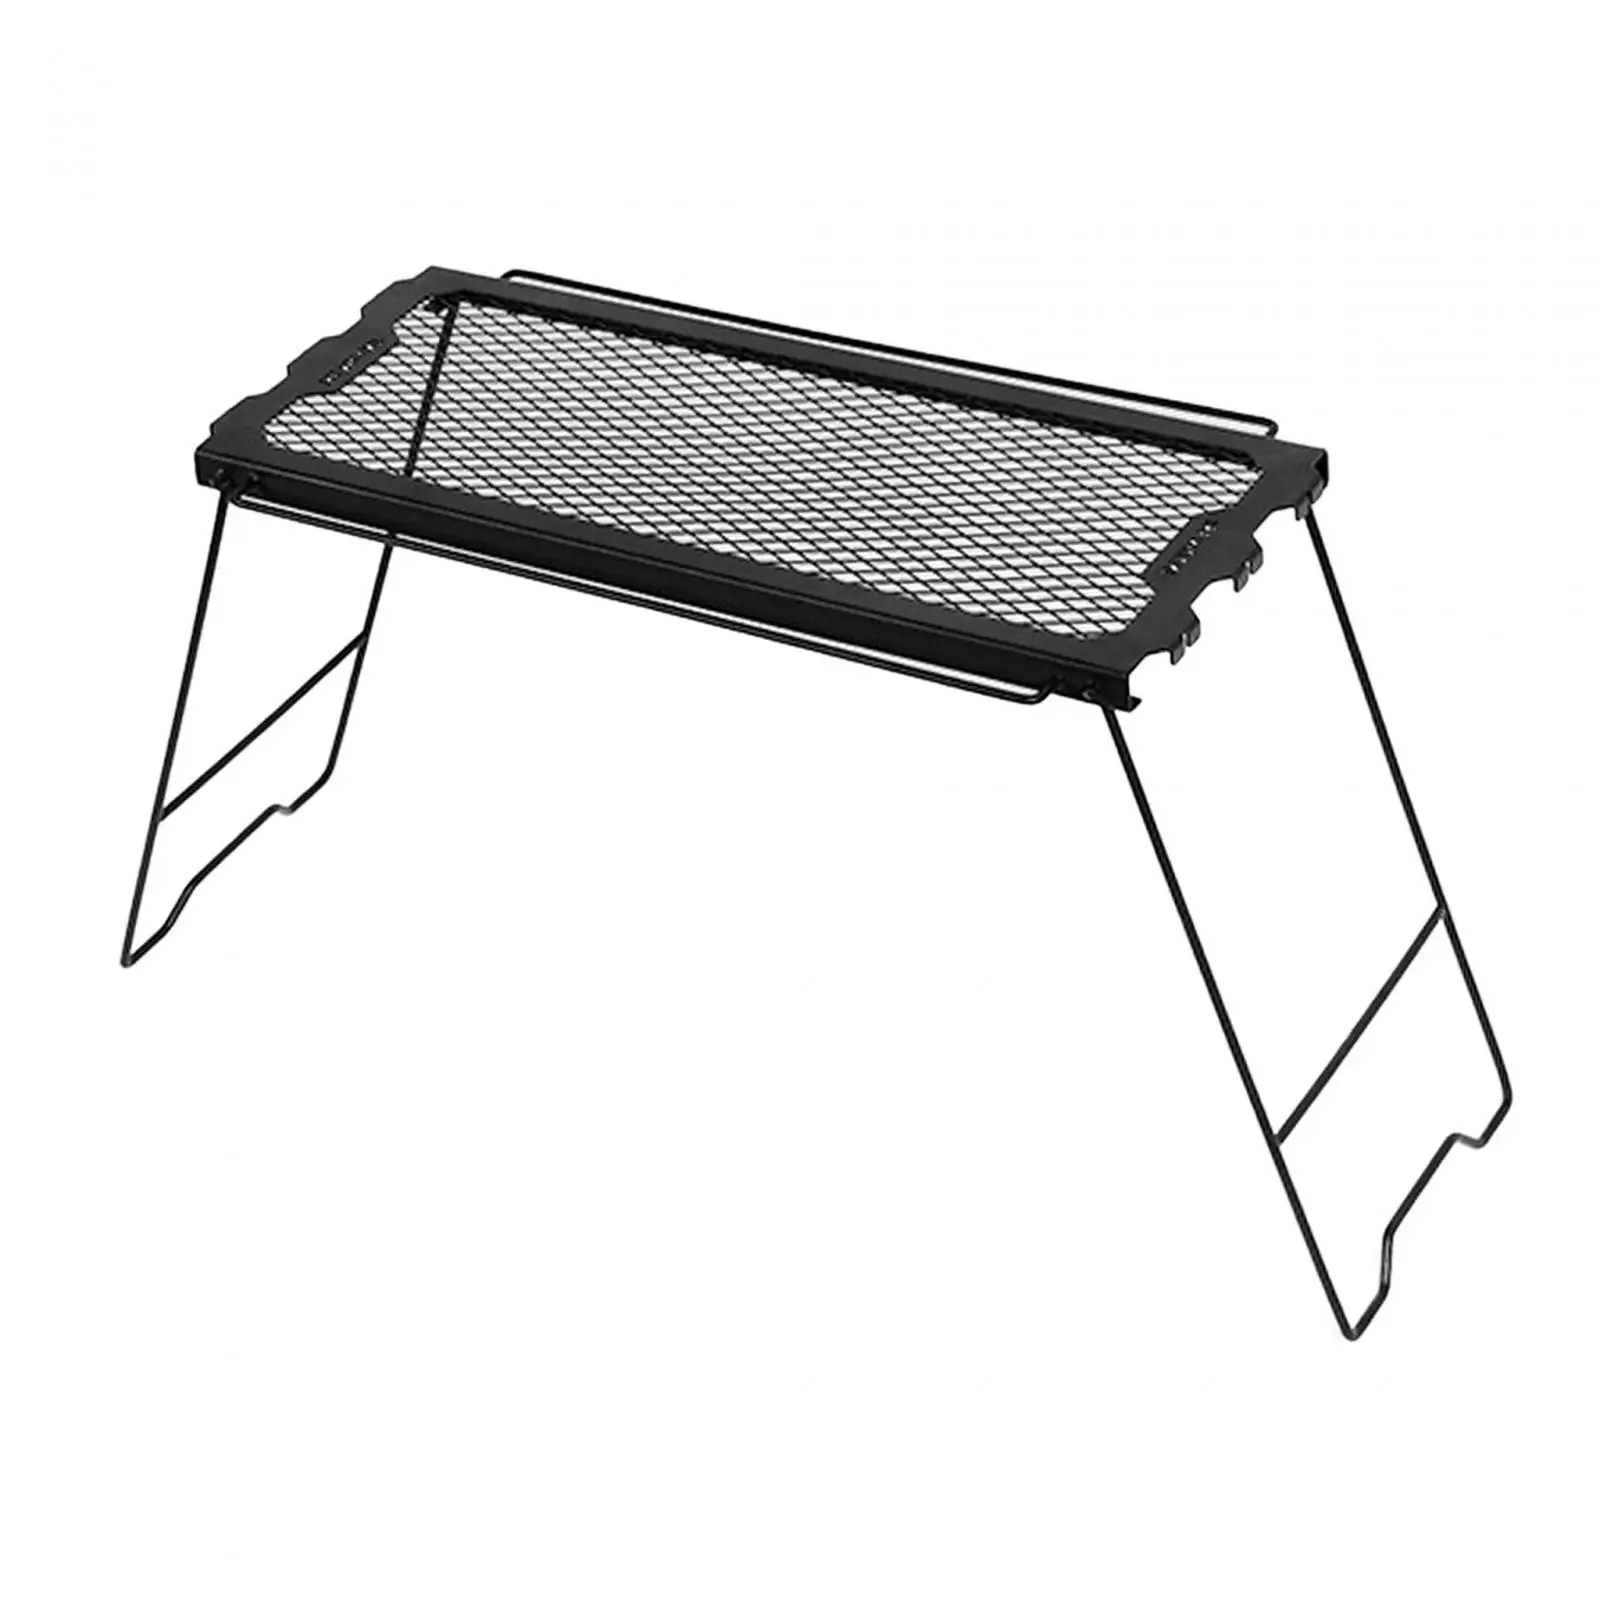 Folding Camping Table Camping Cooking Grate over Fire for RV Hiking Garden